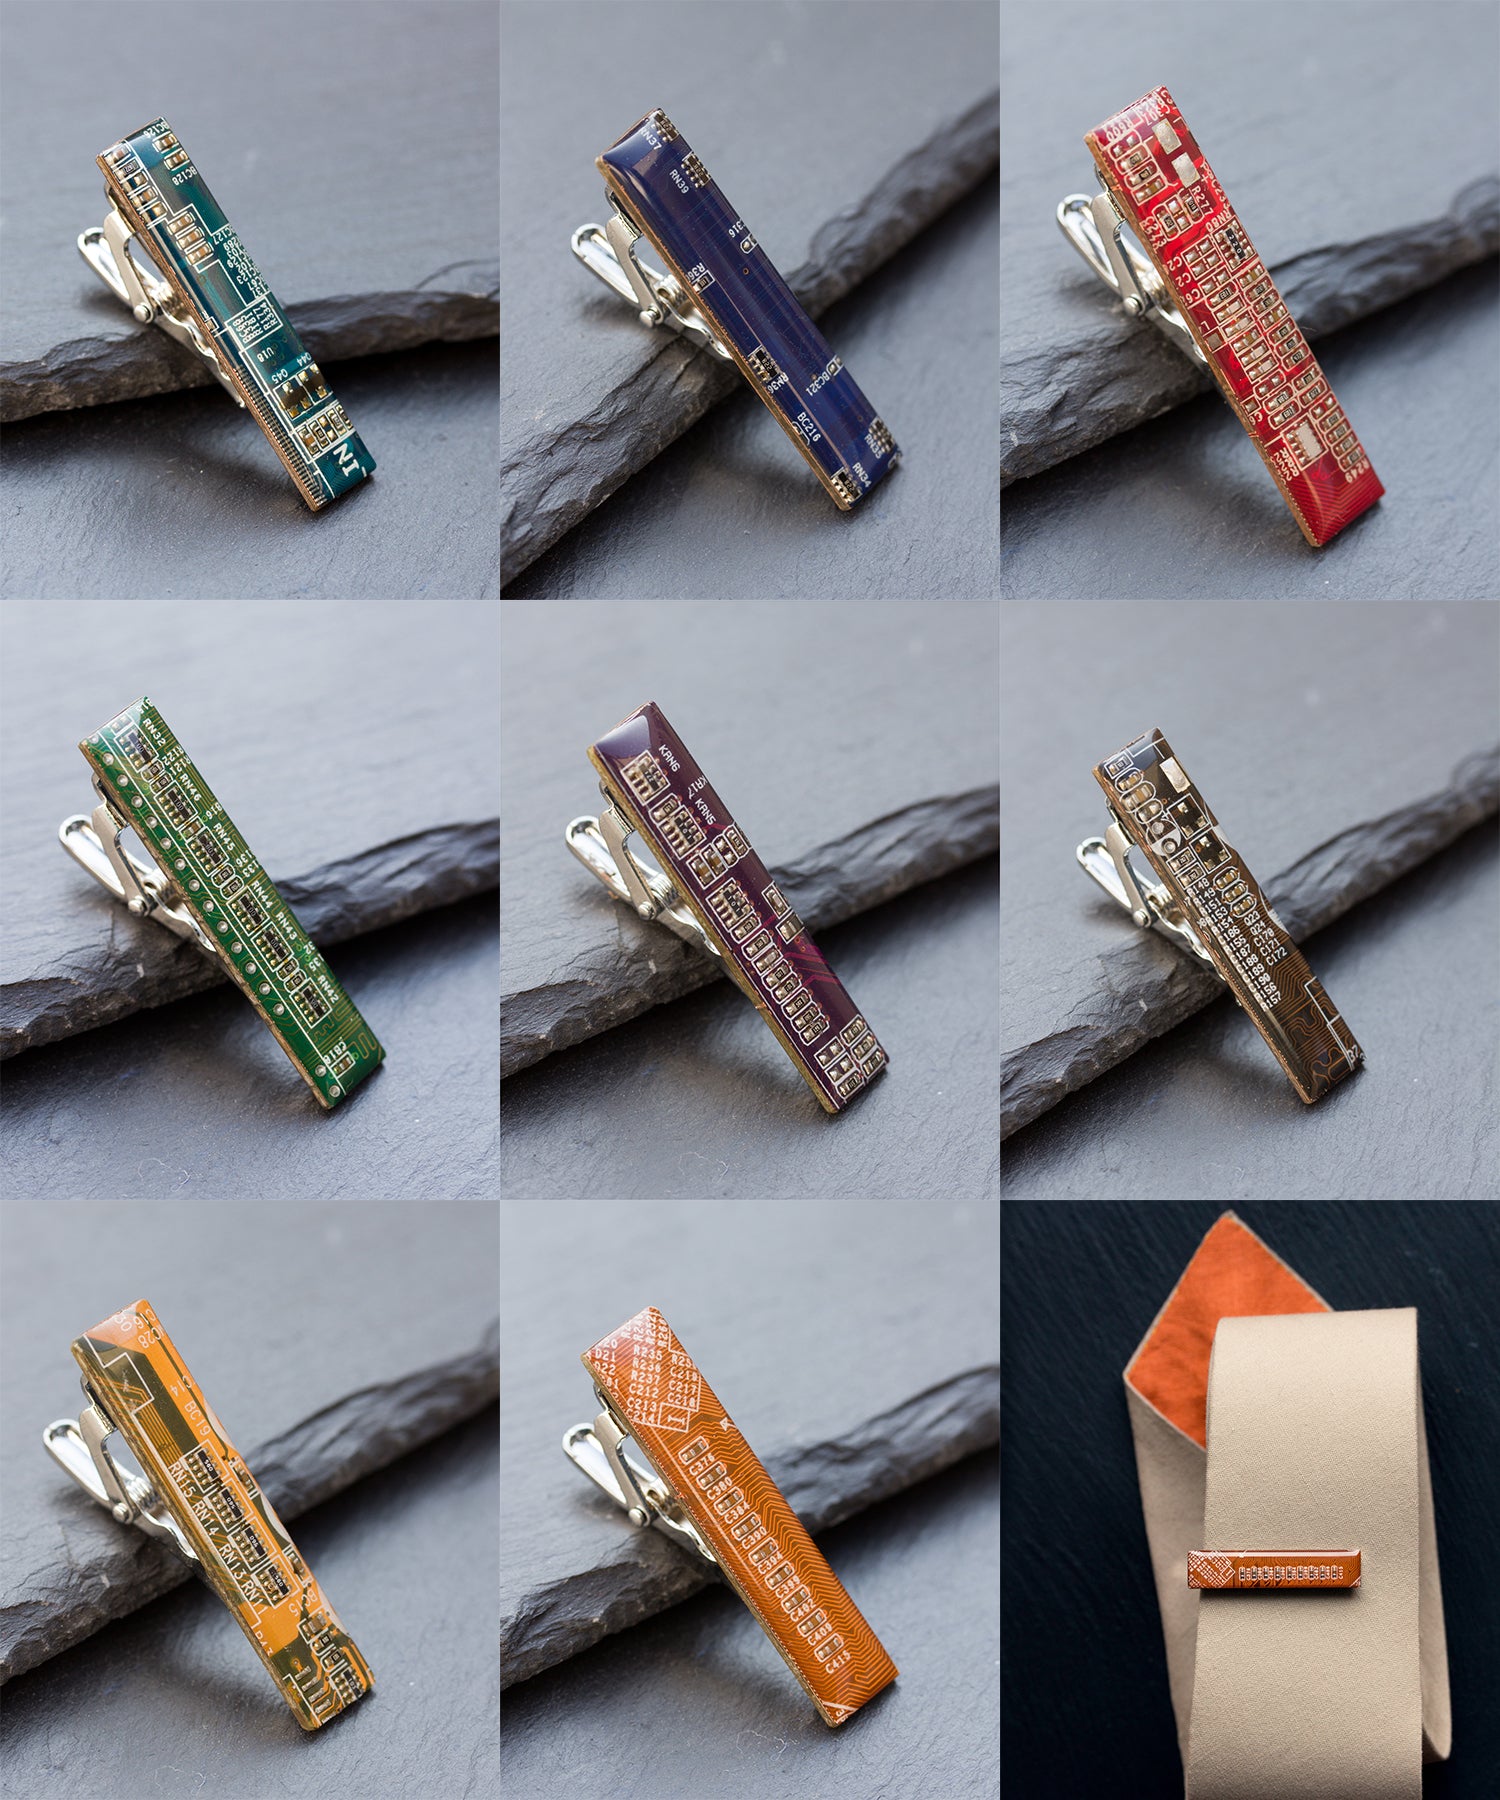 Short tie bar for a slim tie, made of circuit board